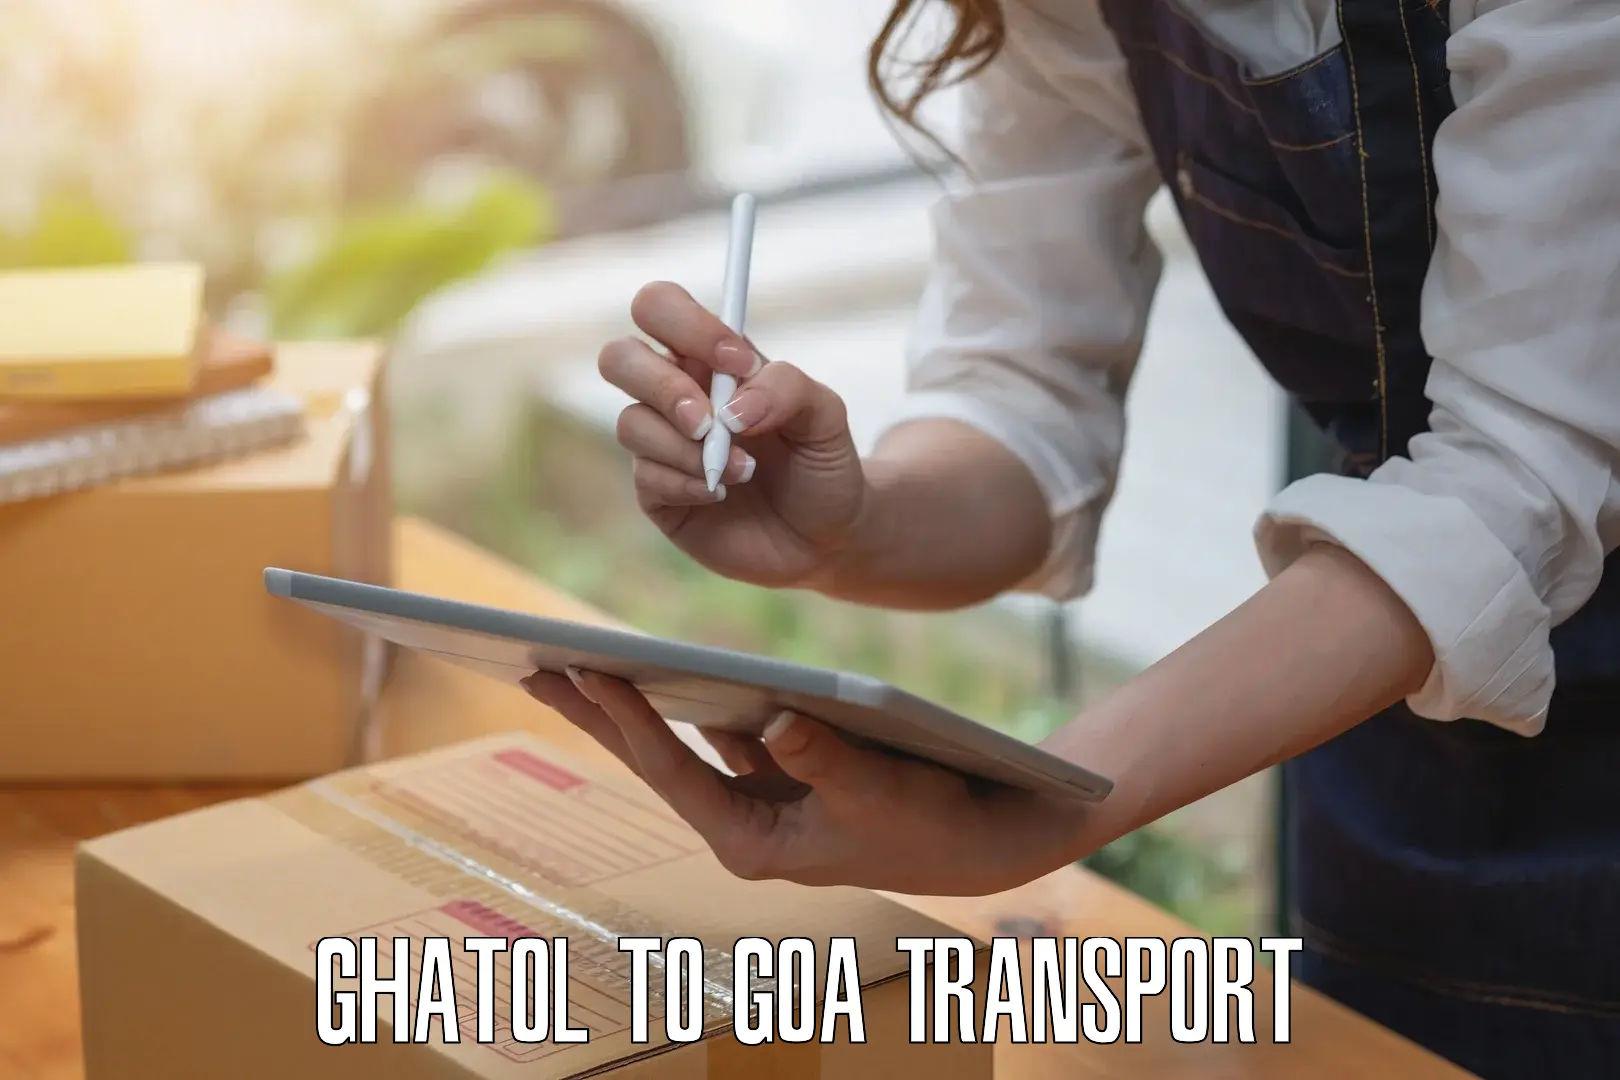 Interstate transport services Ghatol to South Goa